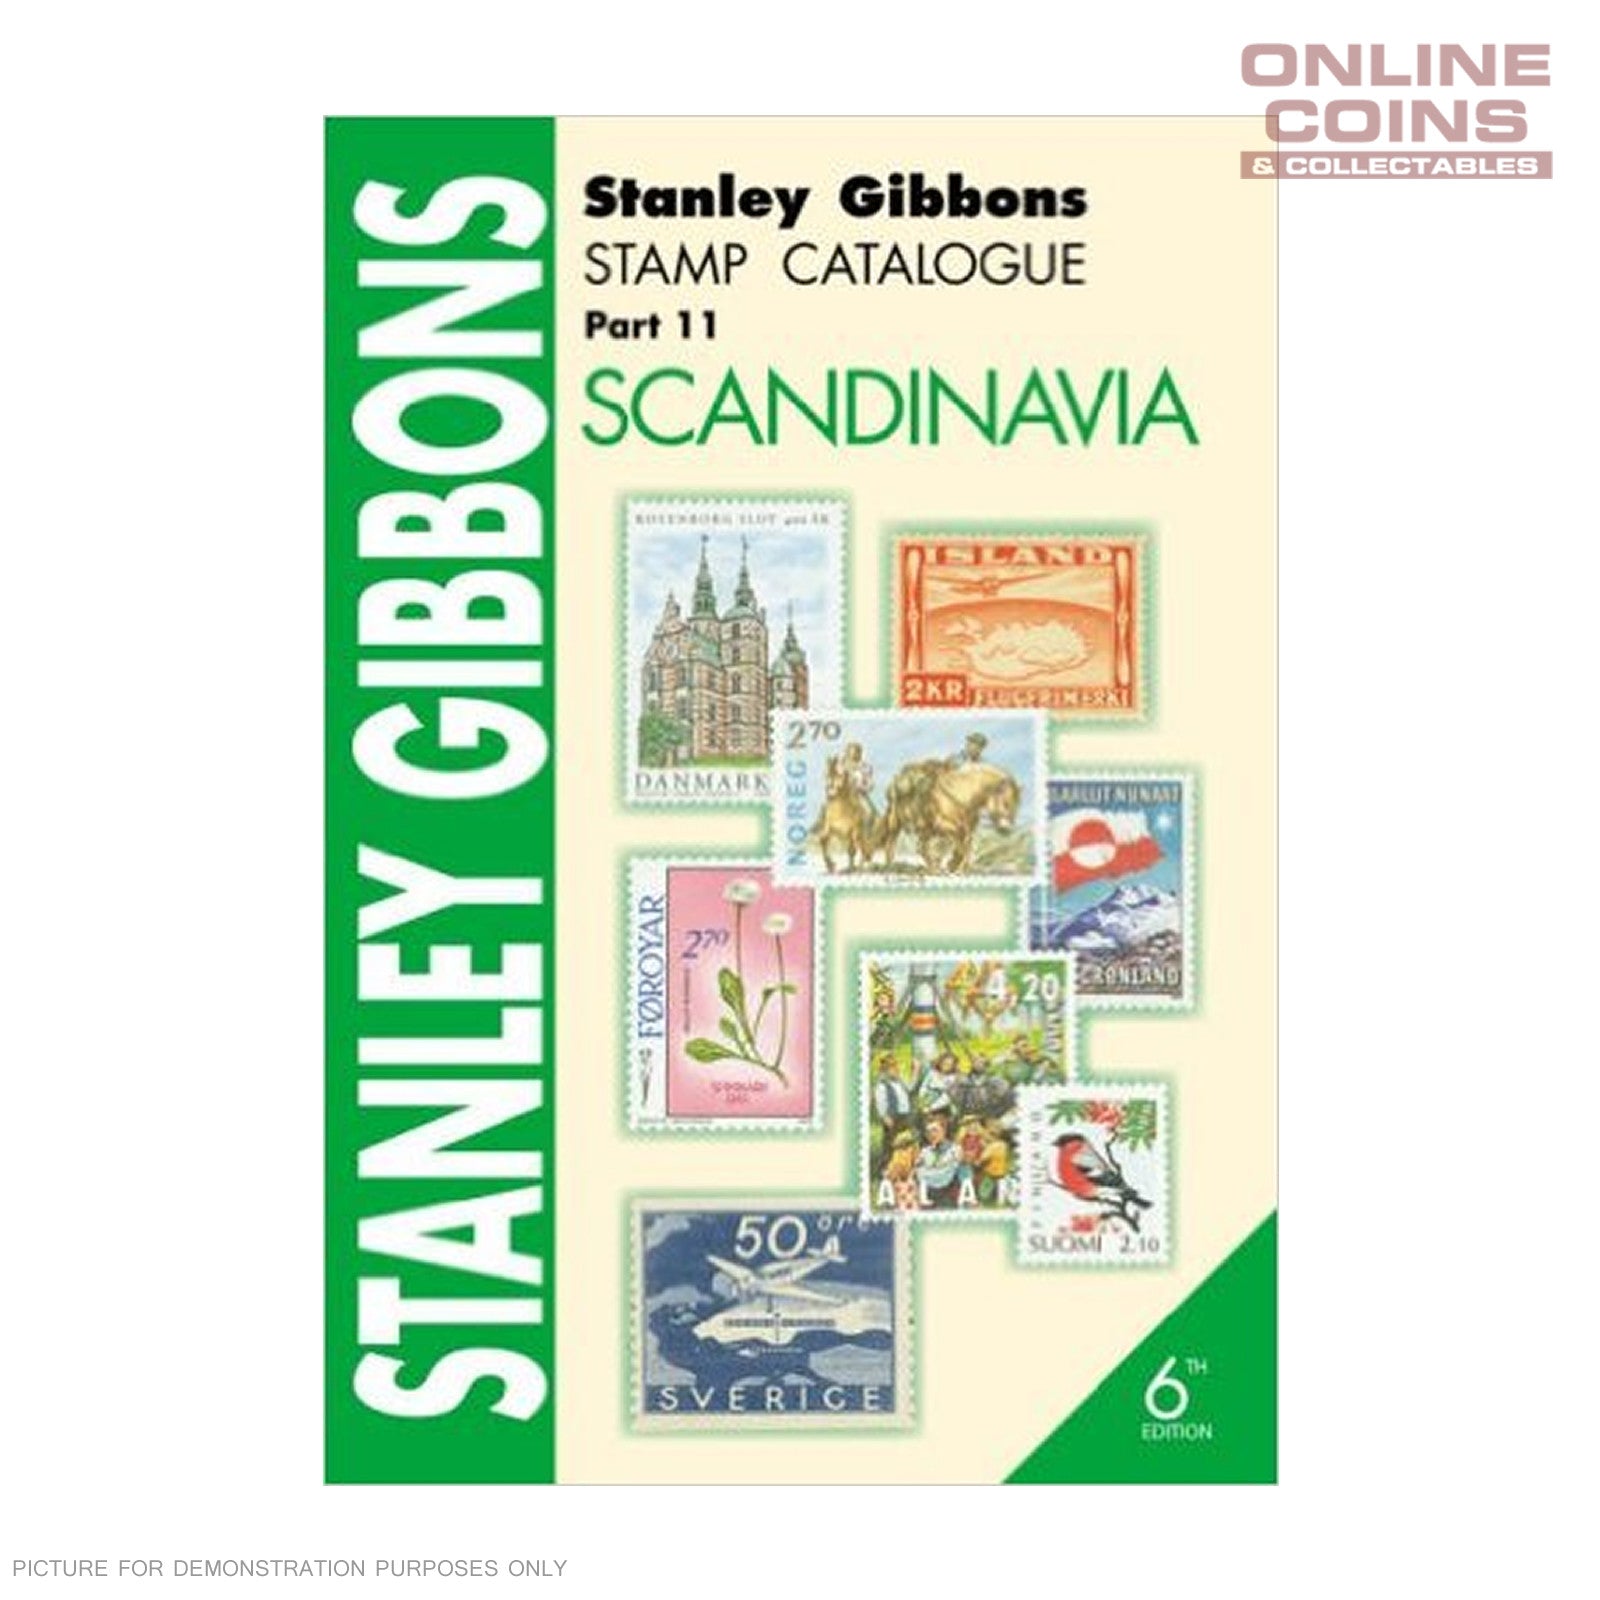 Stanley Gibbons Stamp Catalogue Scandinavia Soft Cover Book 6th Edition Part 11